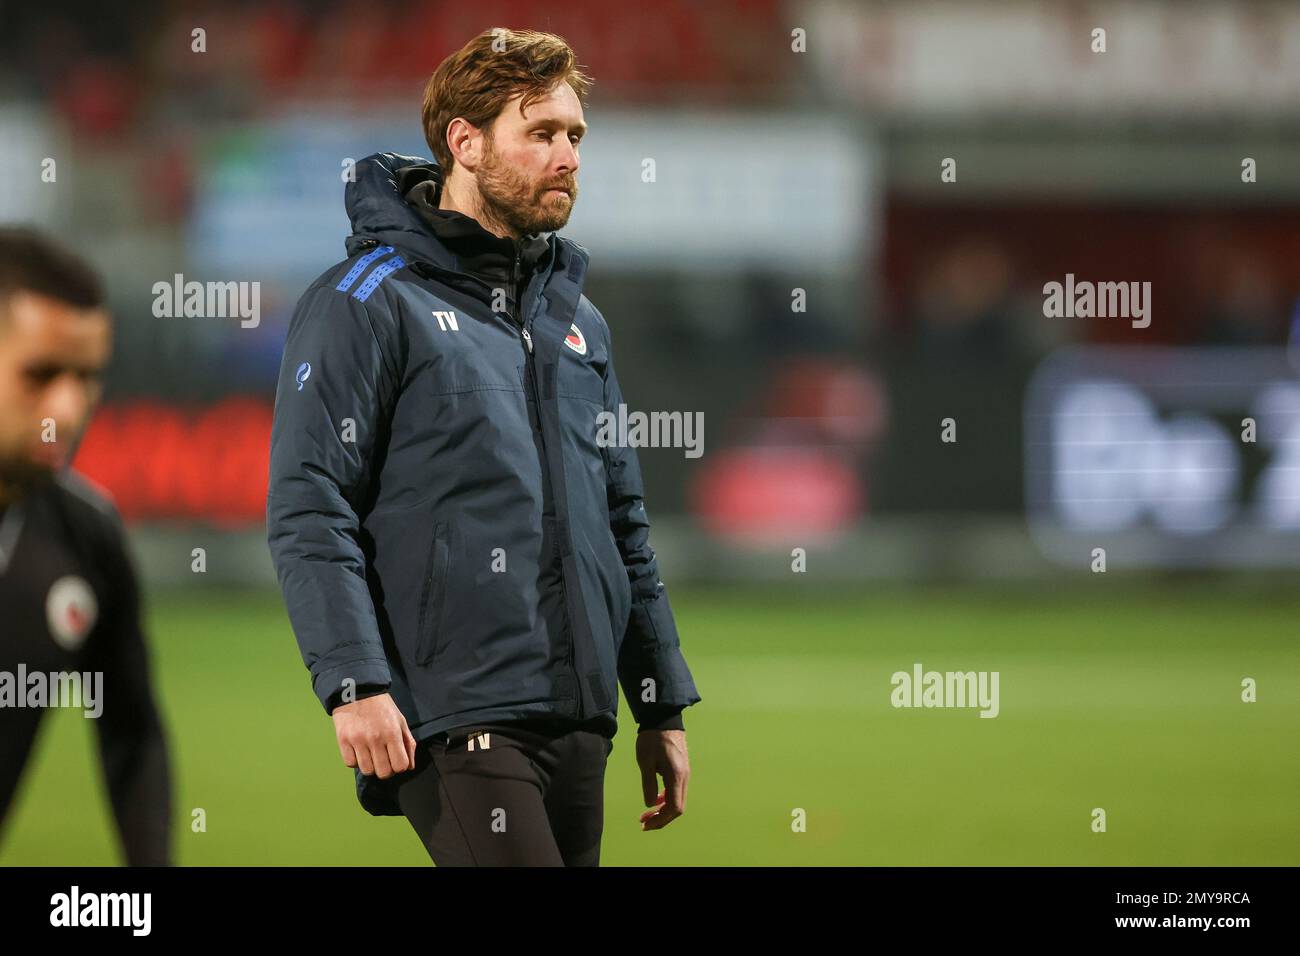 ROTTERDAM, NETHERLANDS - FEBRUARY 4: Assistent coach Thomas Verhaar of  Excelsior Rotterdam during the Dutch Eredivisie match between Excelsior  Rotterdam and RKC Waalwijk at Van Dongen & De Roo Stadion on February